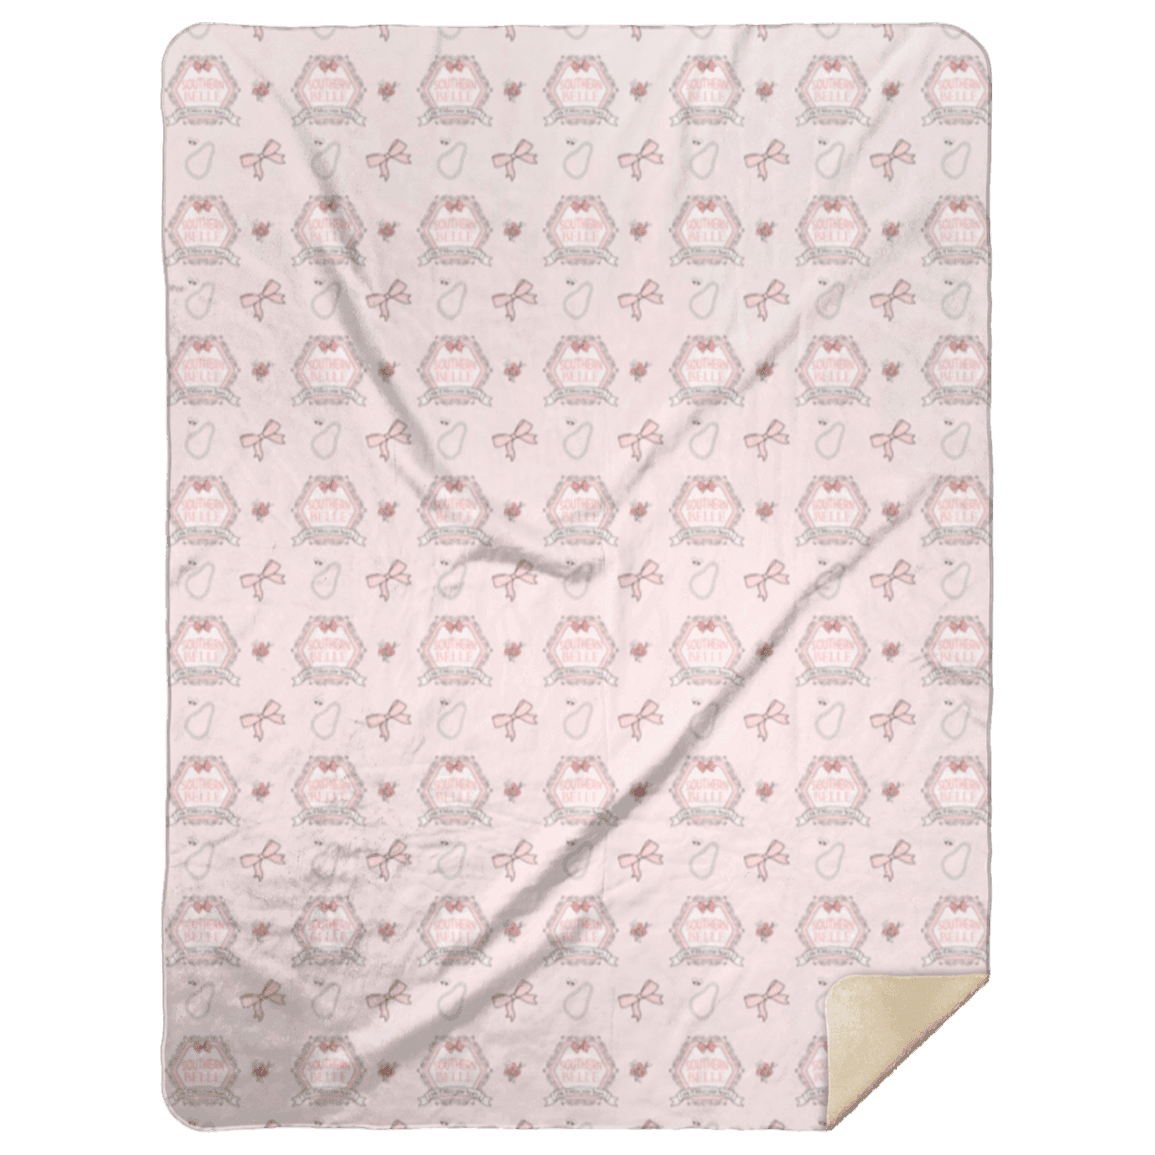 Southern Belle plush throw blanket, 60x80 inches, featuring a charming Southern-themed design in pastel colors.